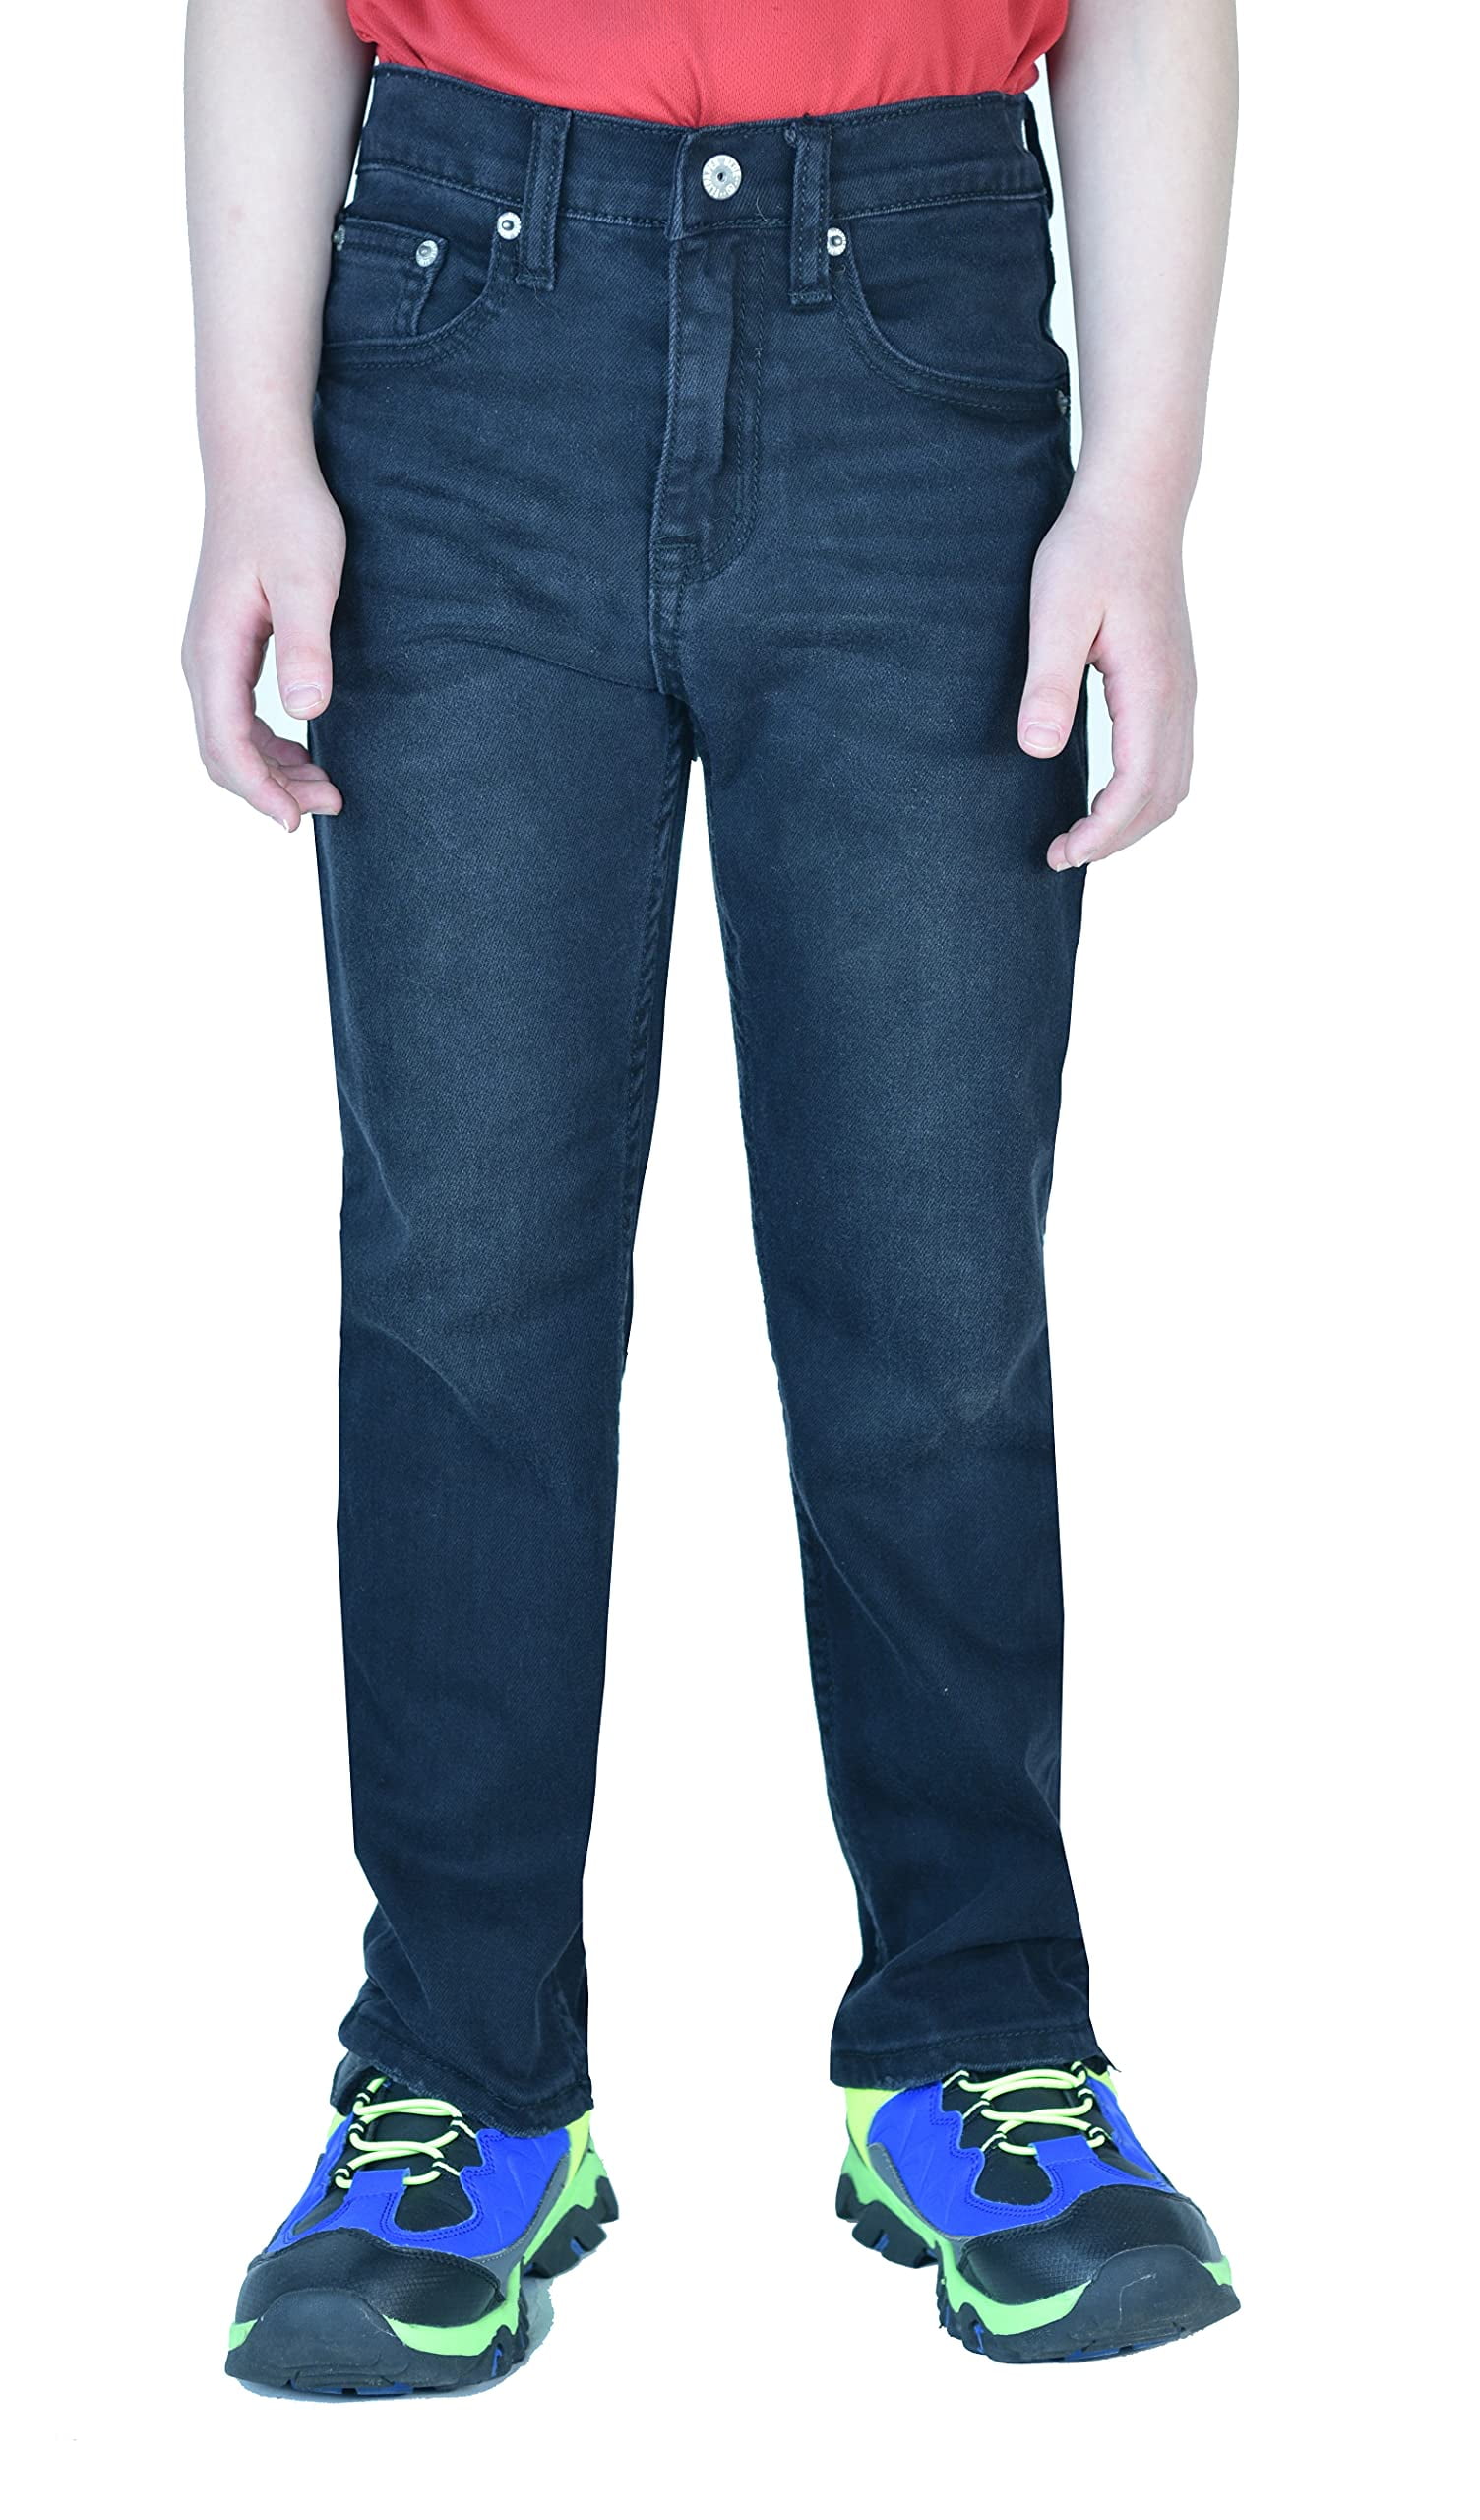 Boys Fashion Bottoms Jeans at Cookie's Kids